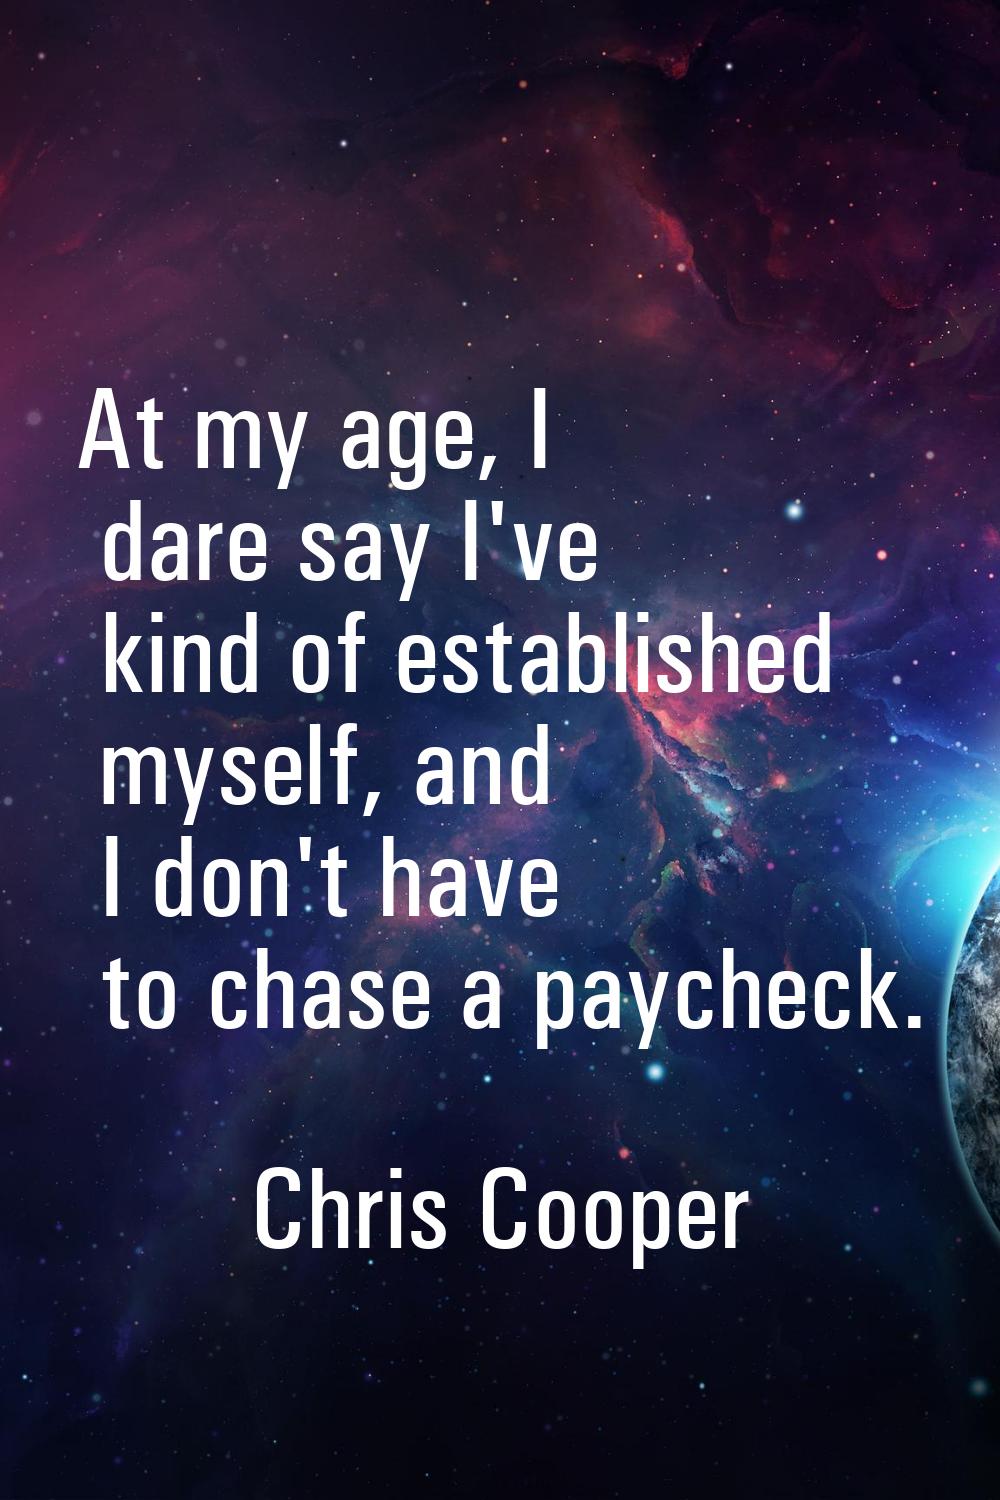 At my age, I dare say I've kind of established myself, and I don't have to chase a paycheck.